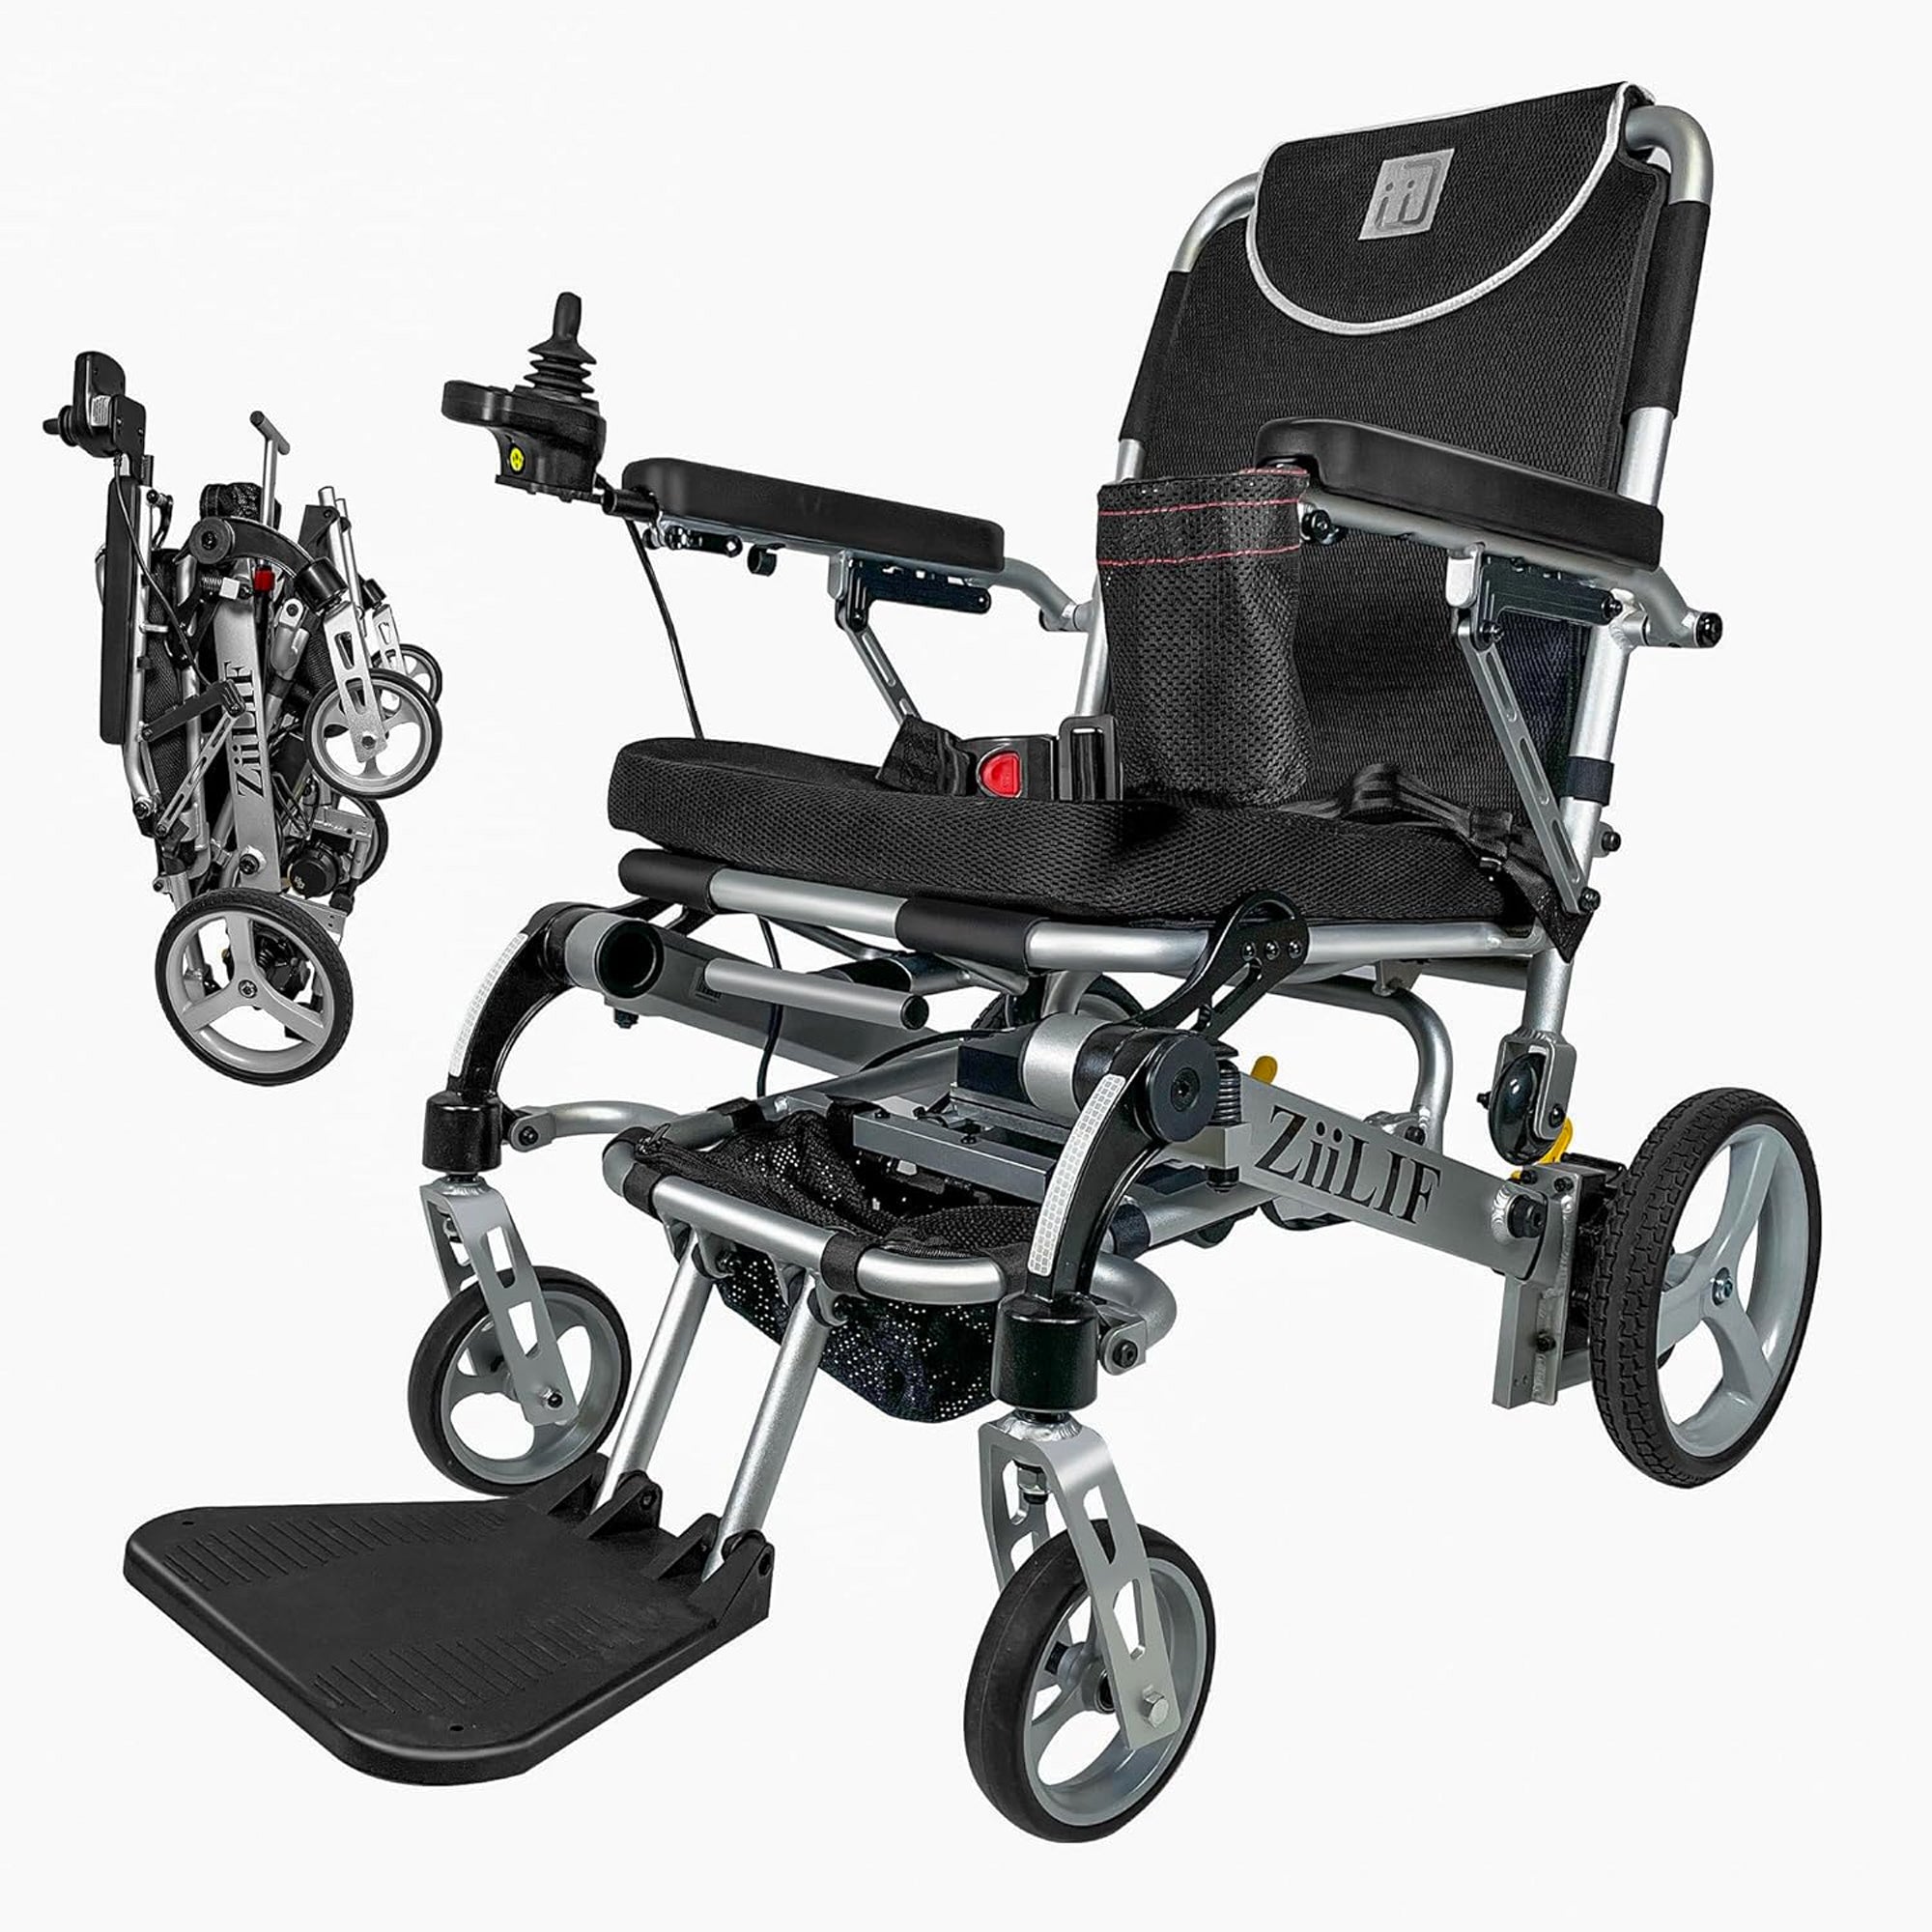 ZiiLIF PC1-2024 - Lightweight (42.1 lb) Folding Electric Wheelchair for Adults with Warranty (Flight Friendly)